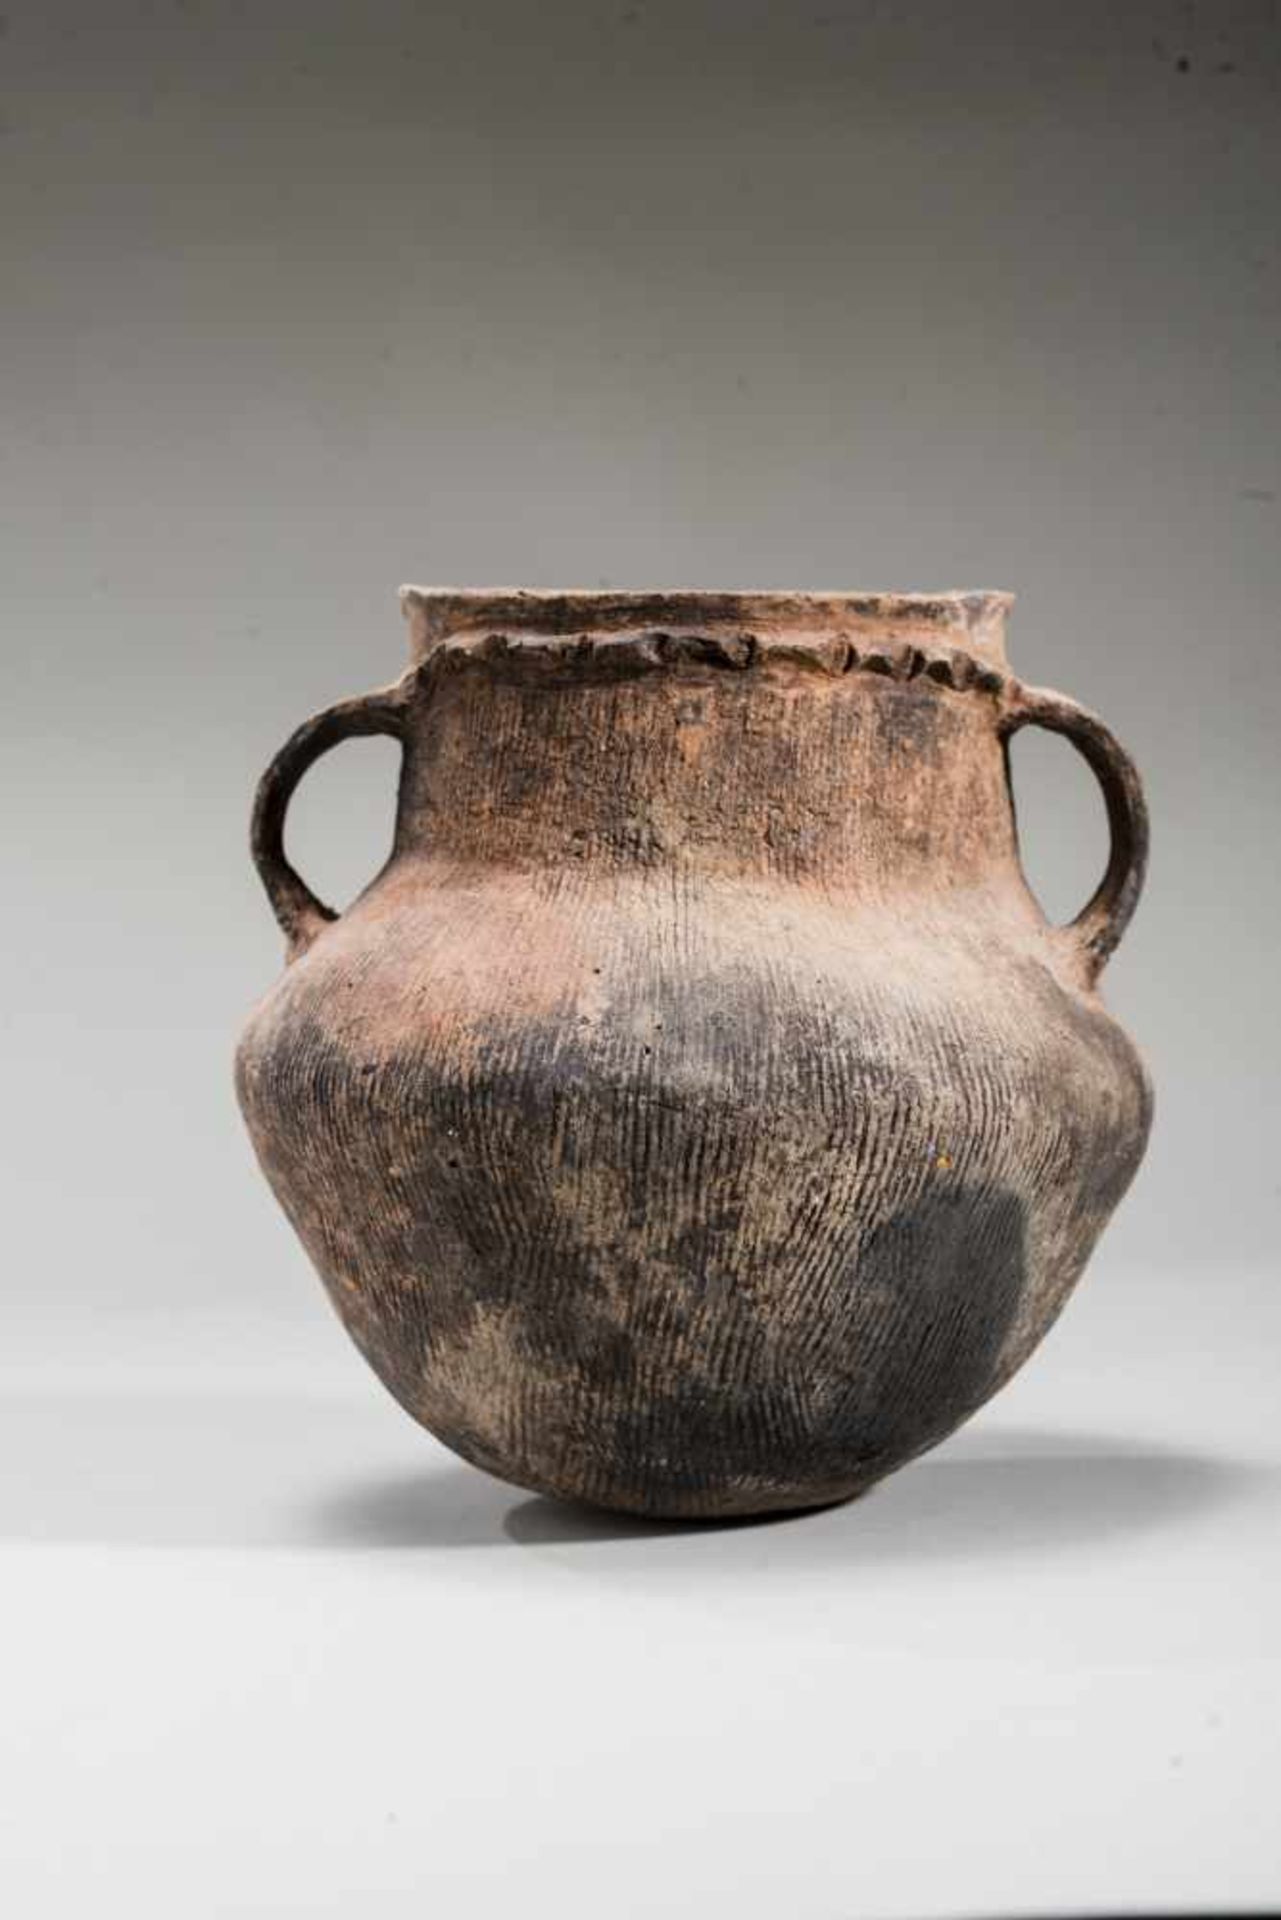 SMALL VESSEL WITH HANDLES - YANGSHAO CULTURETerracotaChina, Yangshao culture, Majiayao style, c. - Image 2 of 7